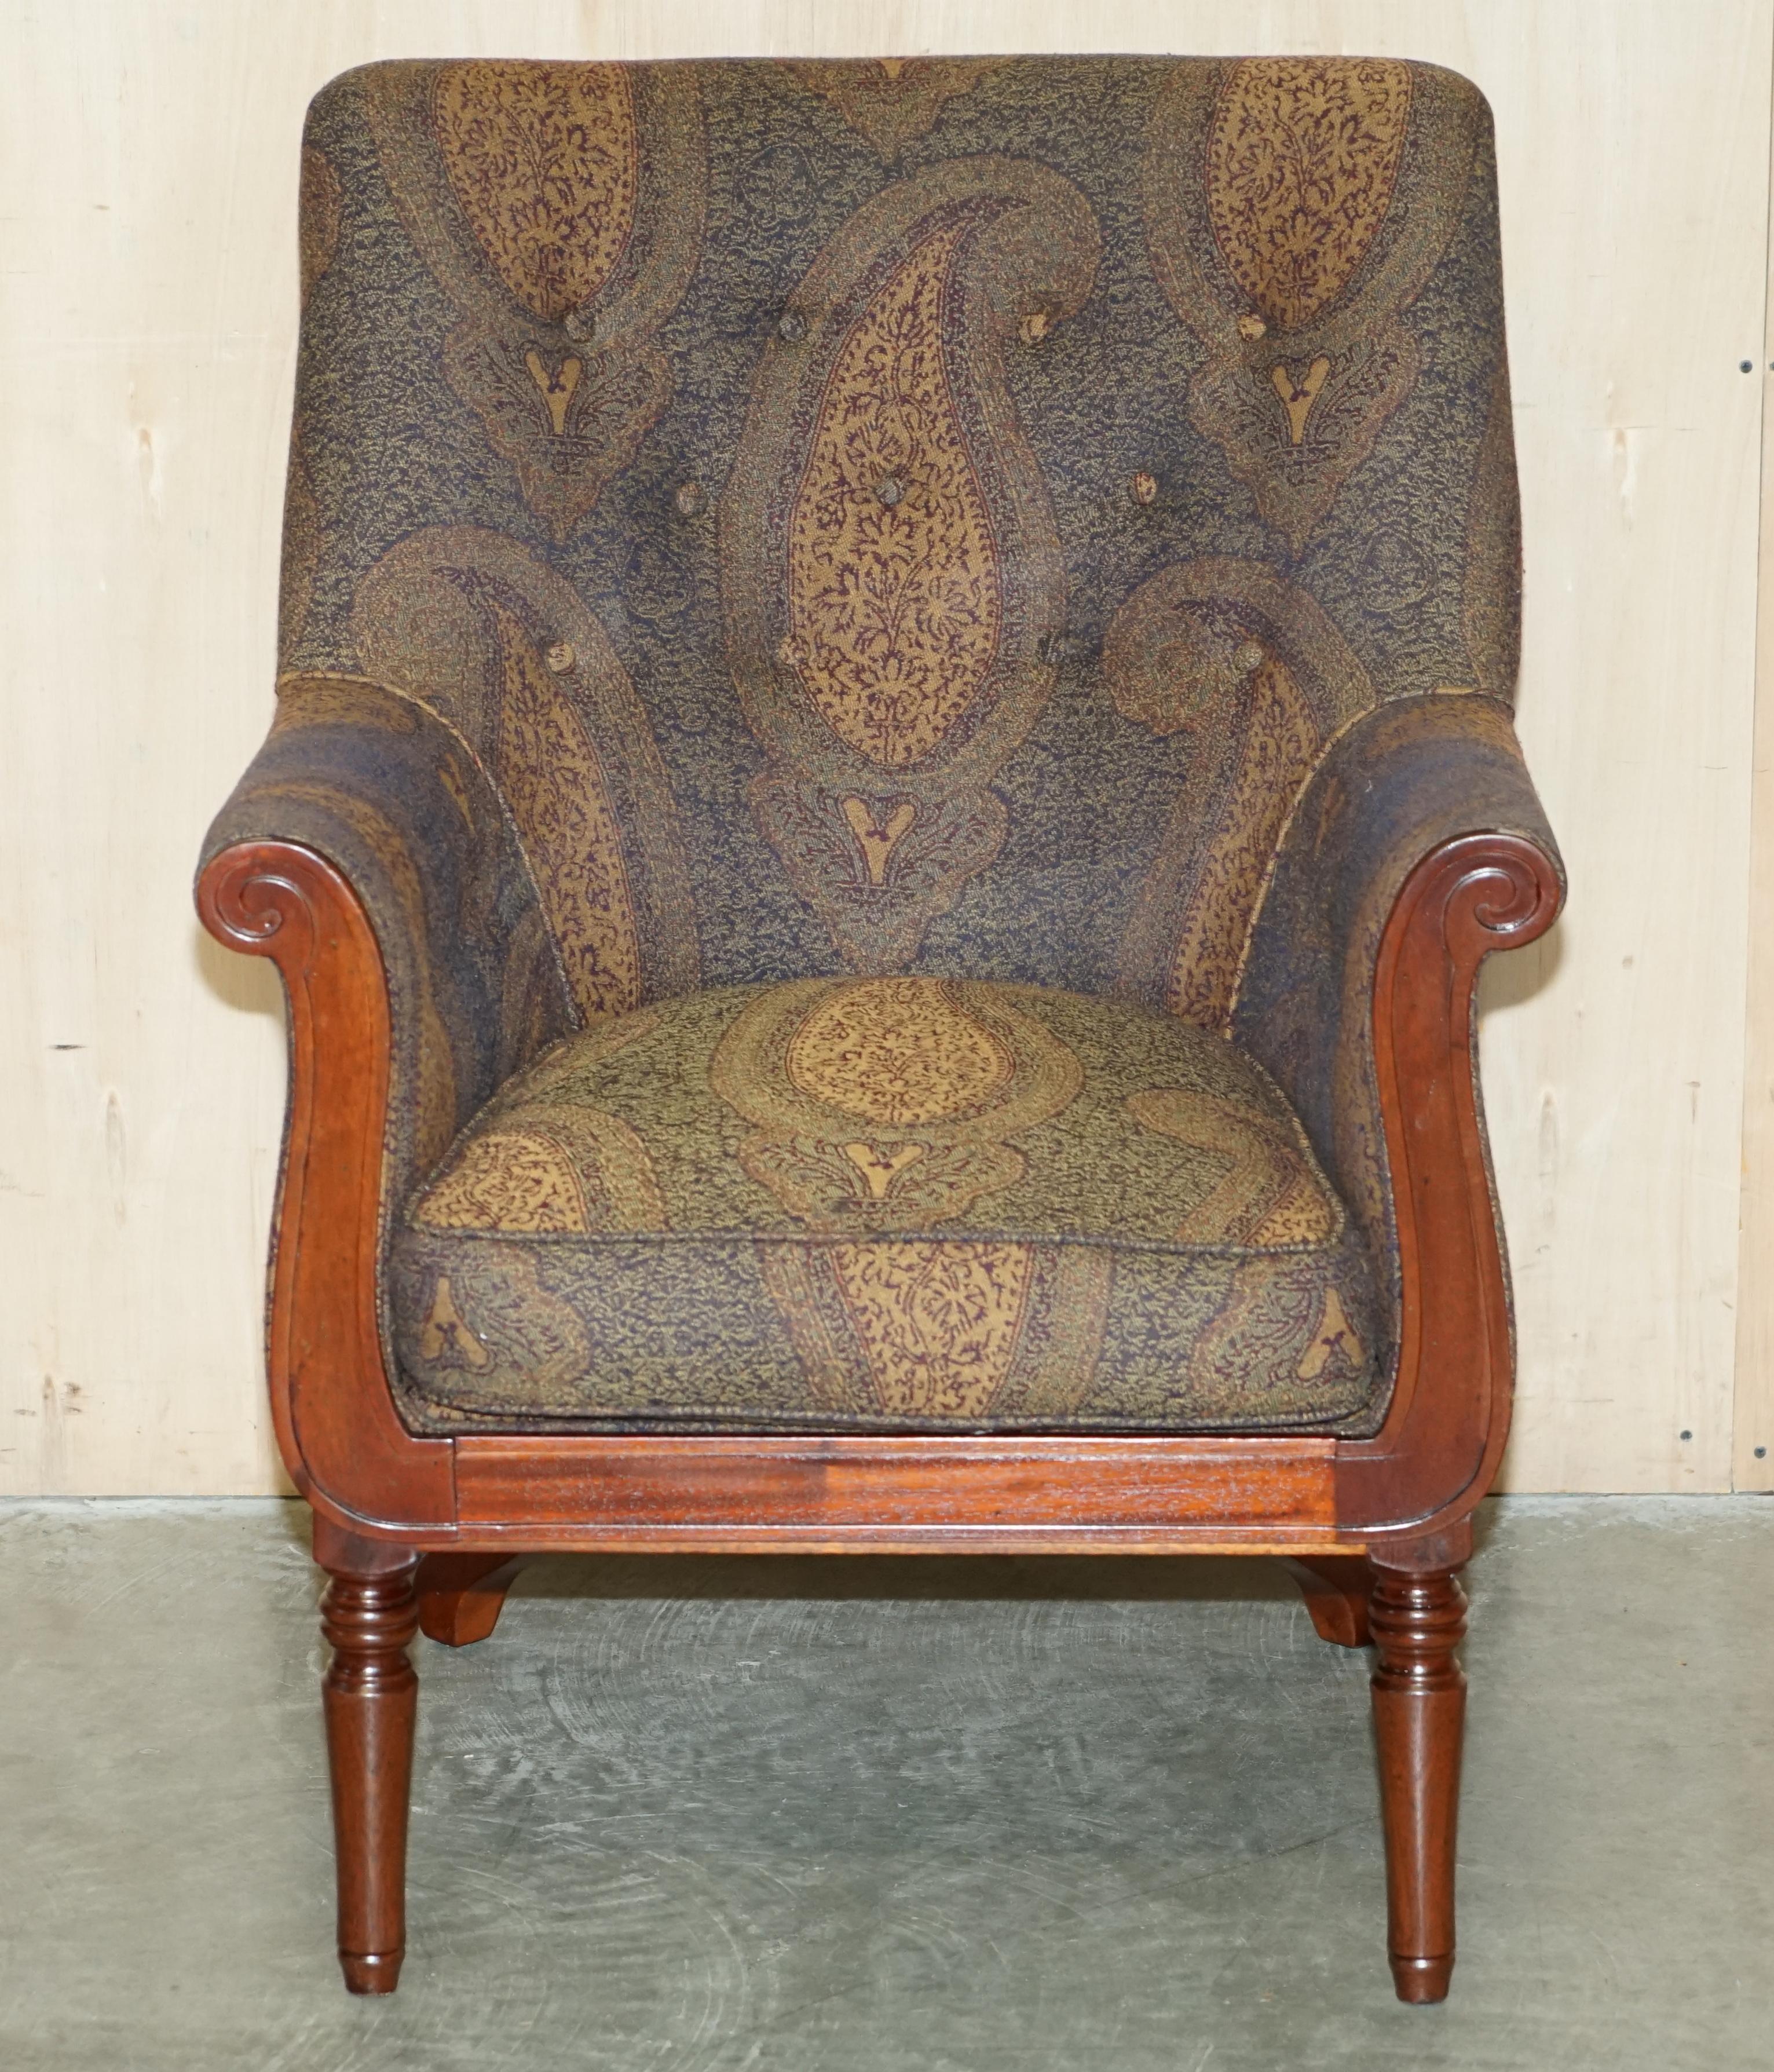 William IV PAiR OF GEORGE SMITH WILLIAM IV LIBRARY ARMCHAIRS UNIQUE UPHOLSTERY